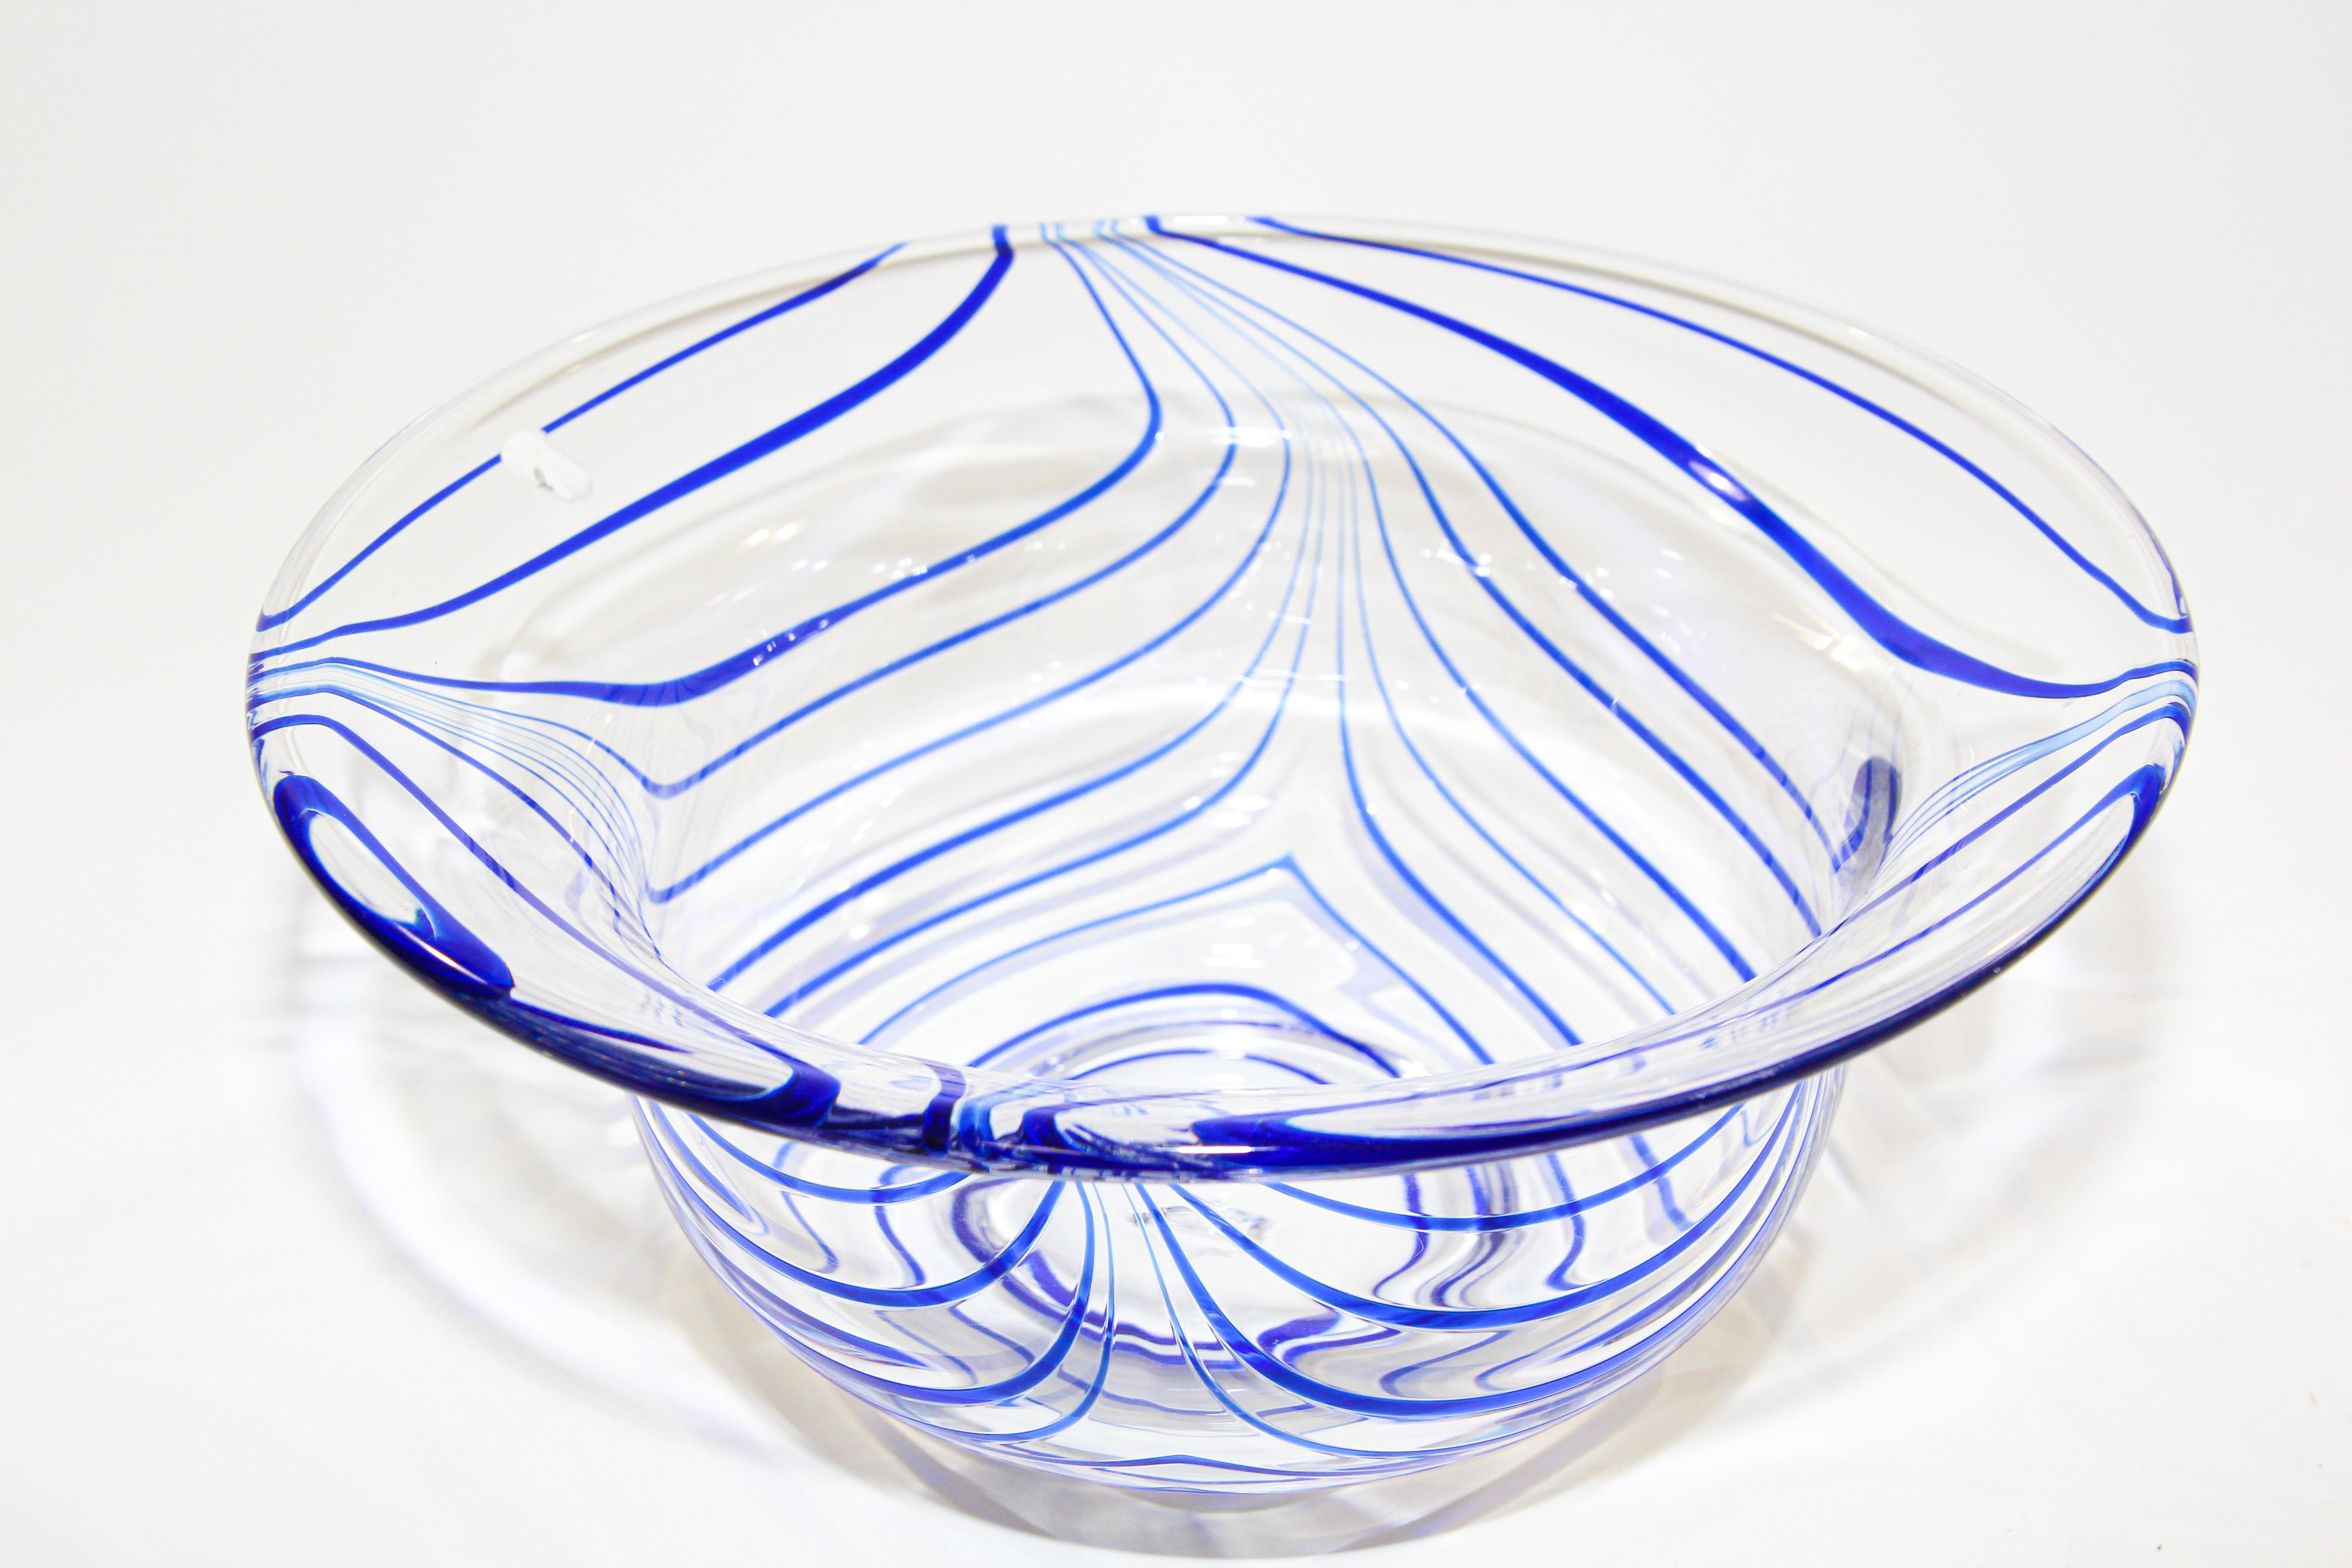 Large vintage exquisite post modern decorative hand blown Murano art crystal glass bowl with a swirl stylized design in an amazing royal cobalt blue on clear glass. Italian Mid-Century Modern hand blown Murano art glass bowl. The piece has blue